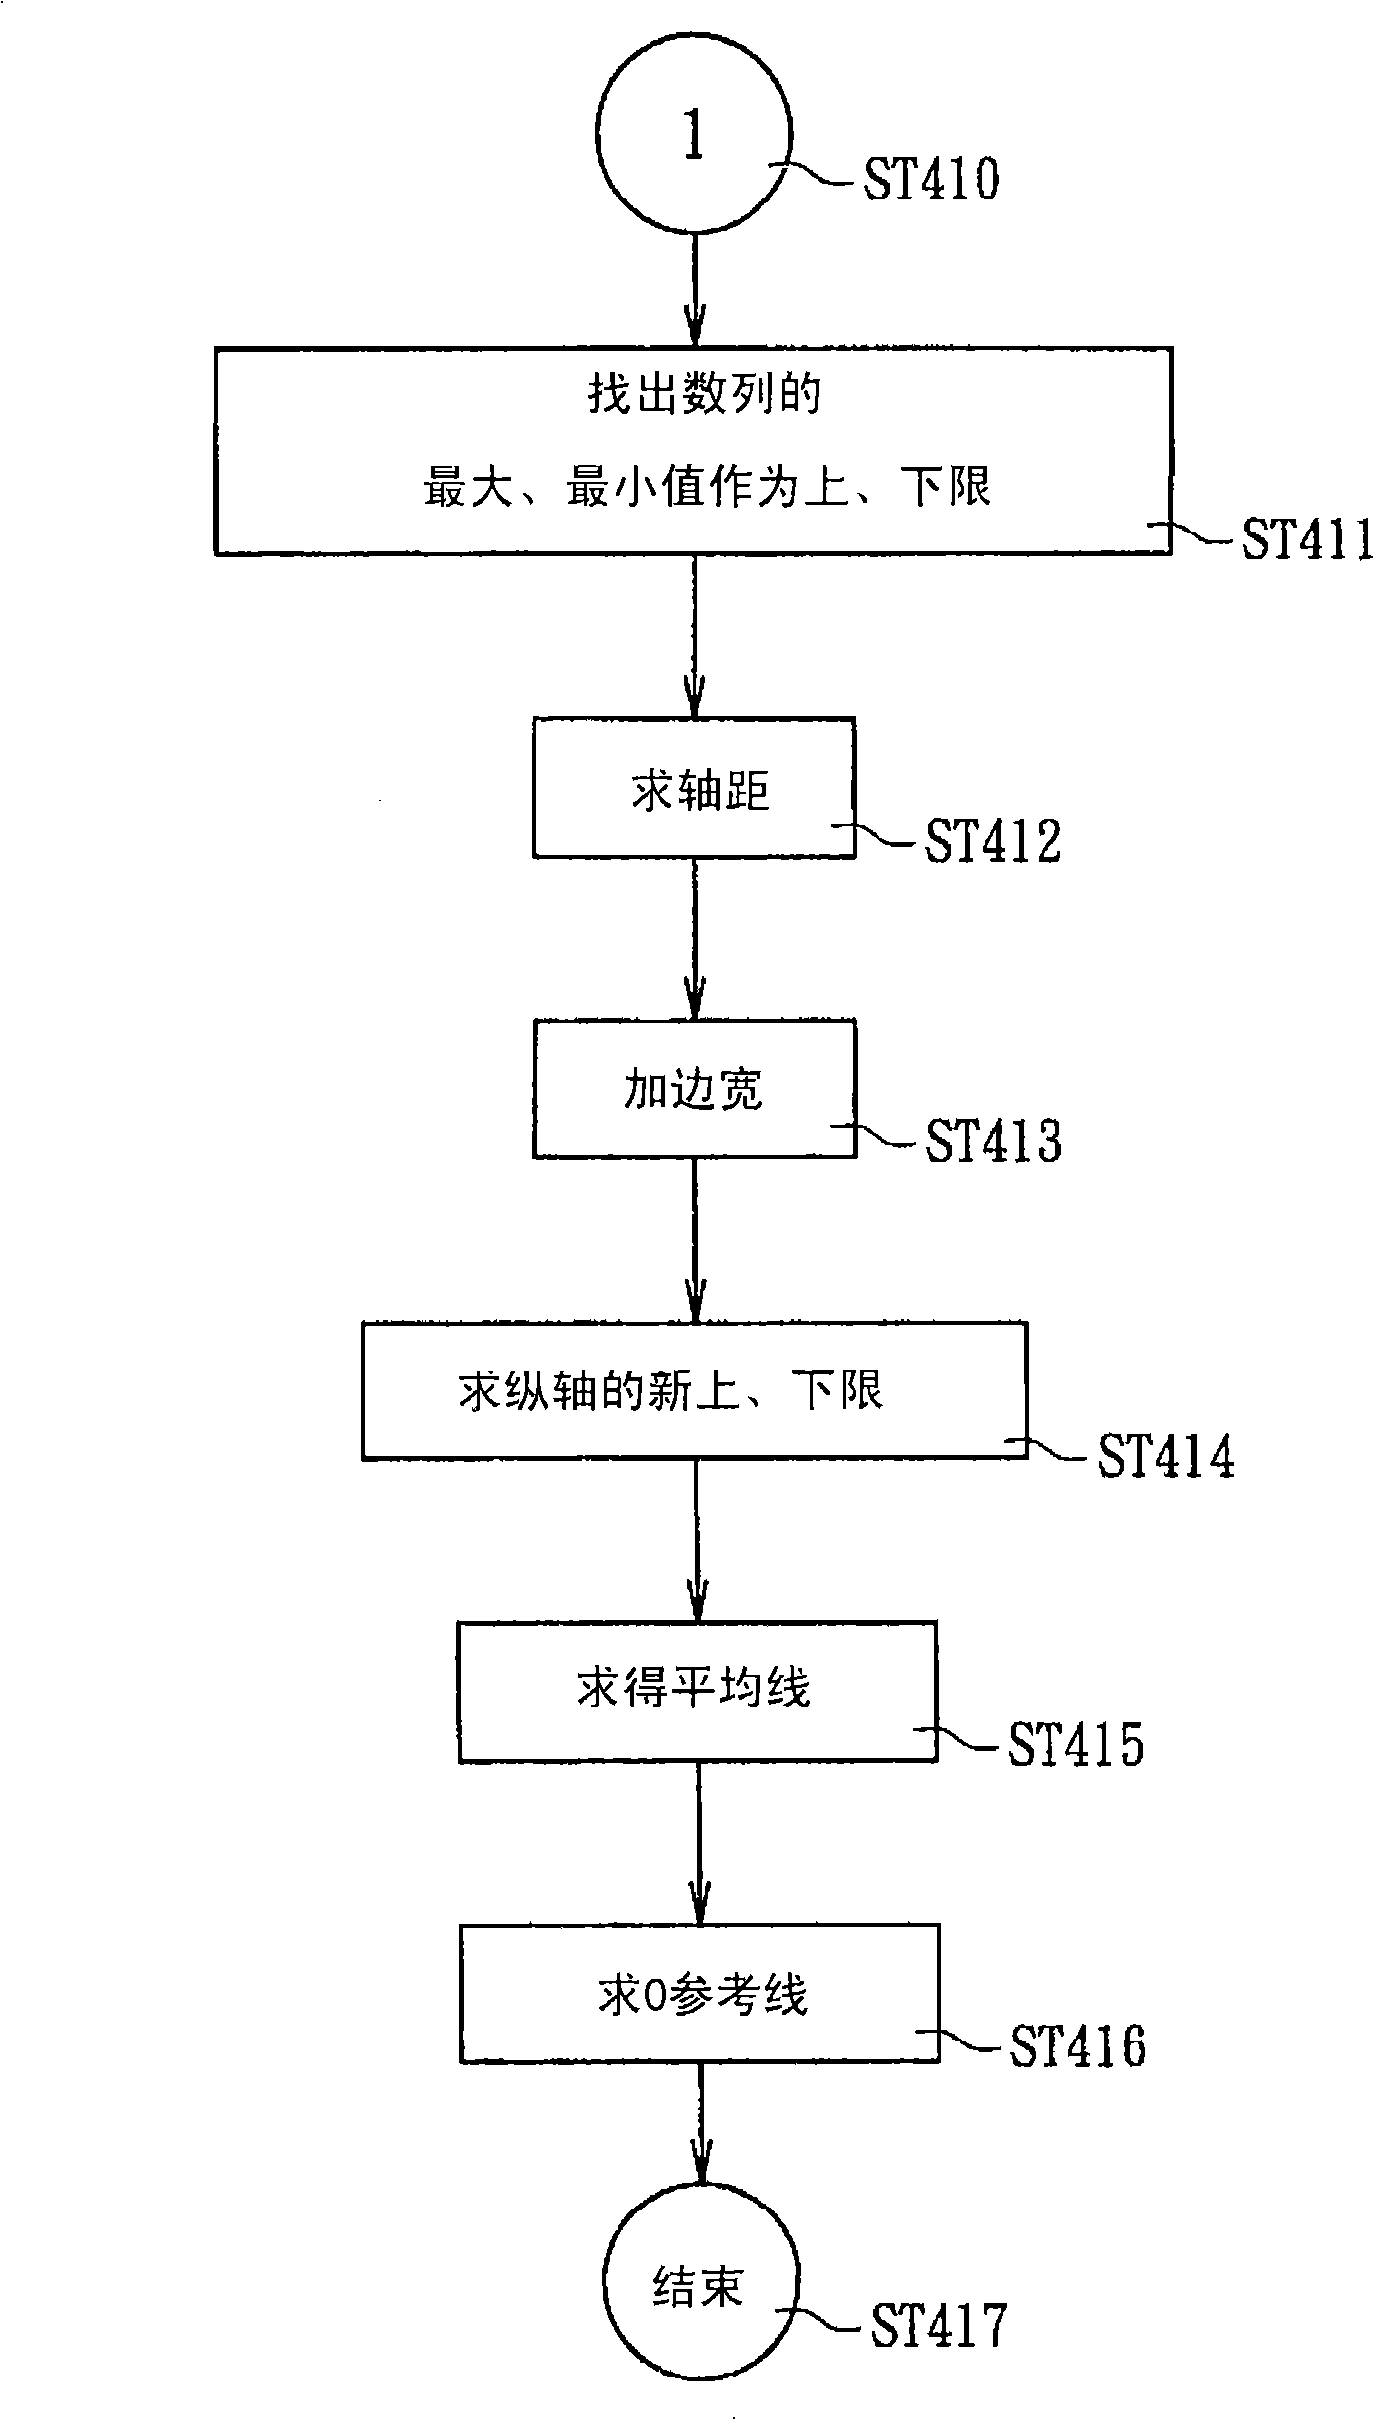 Data group graph notation and apparatus thereof